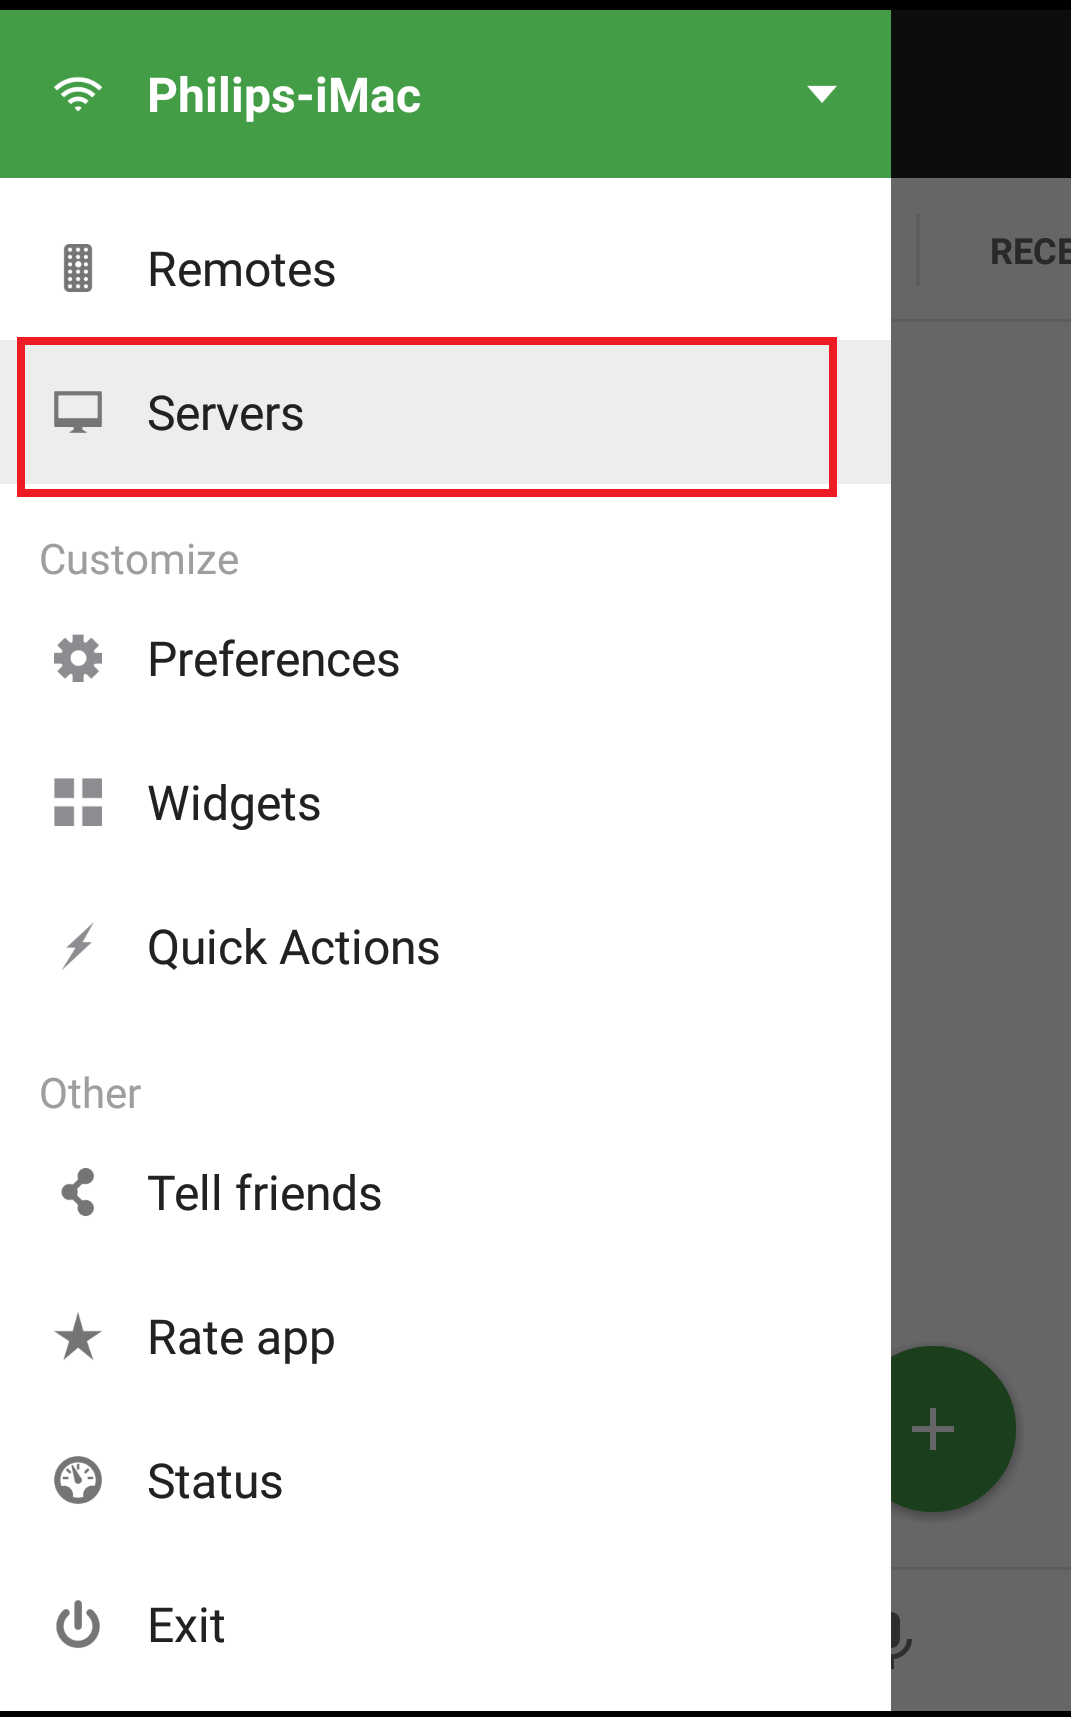 Tap on the Servers option